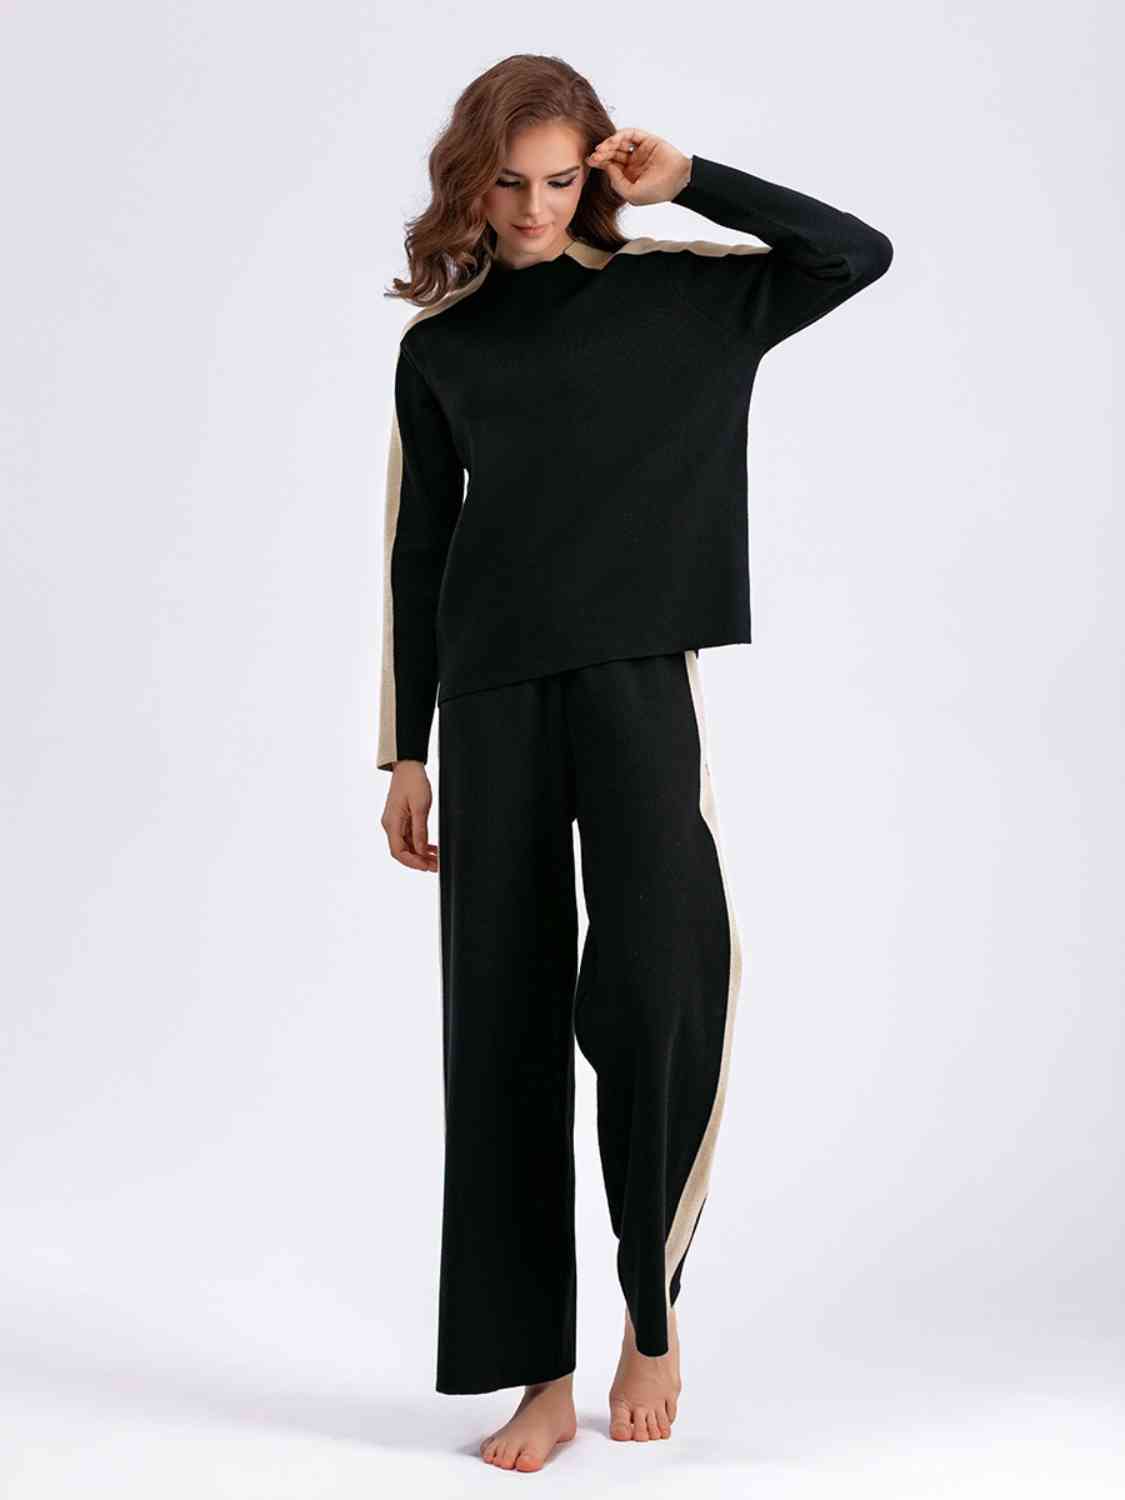 Women's Contrast Sweater and Knit Pants Set Black One Size